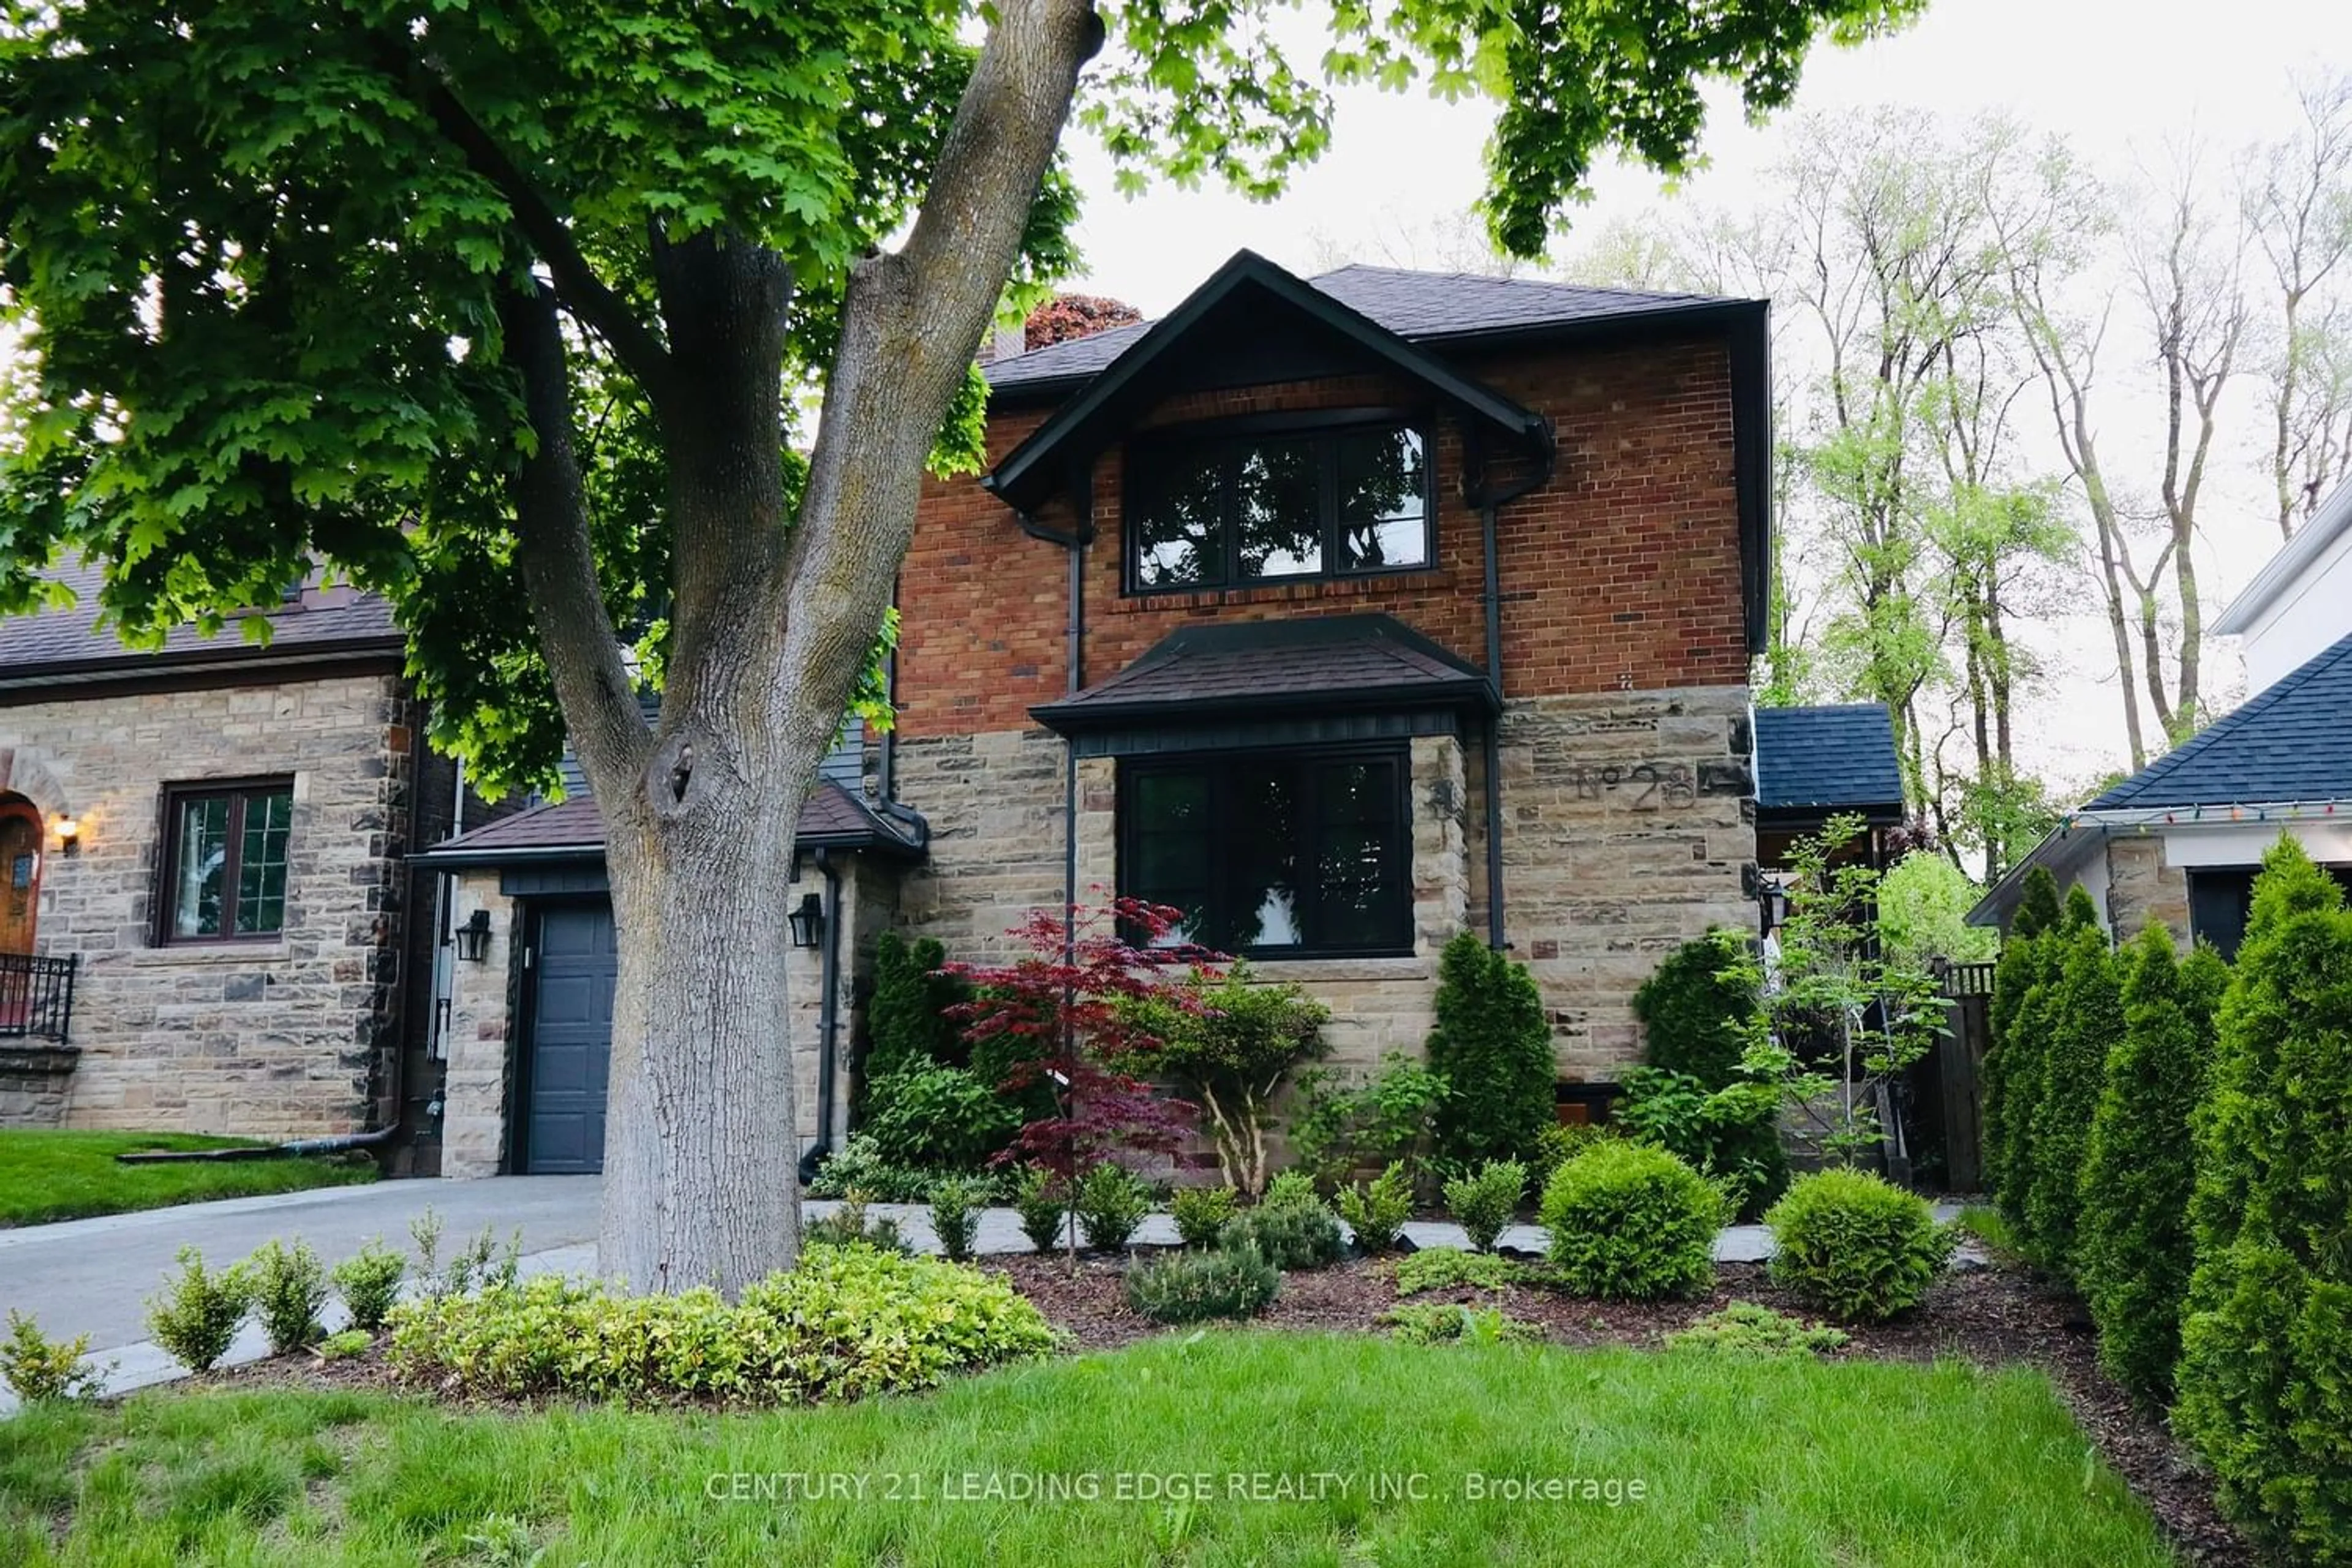 Home with brick exterior material for 28 Glenaden Ave, Toronto Ontario M8Y 2L3